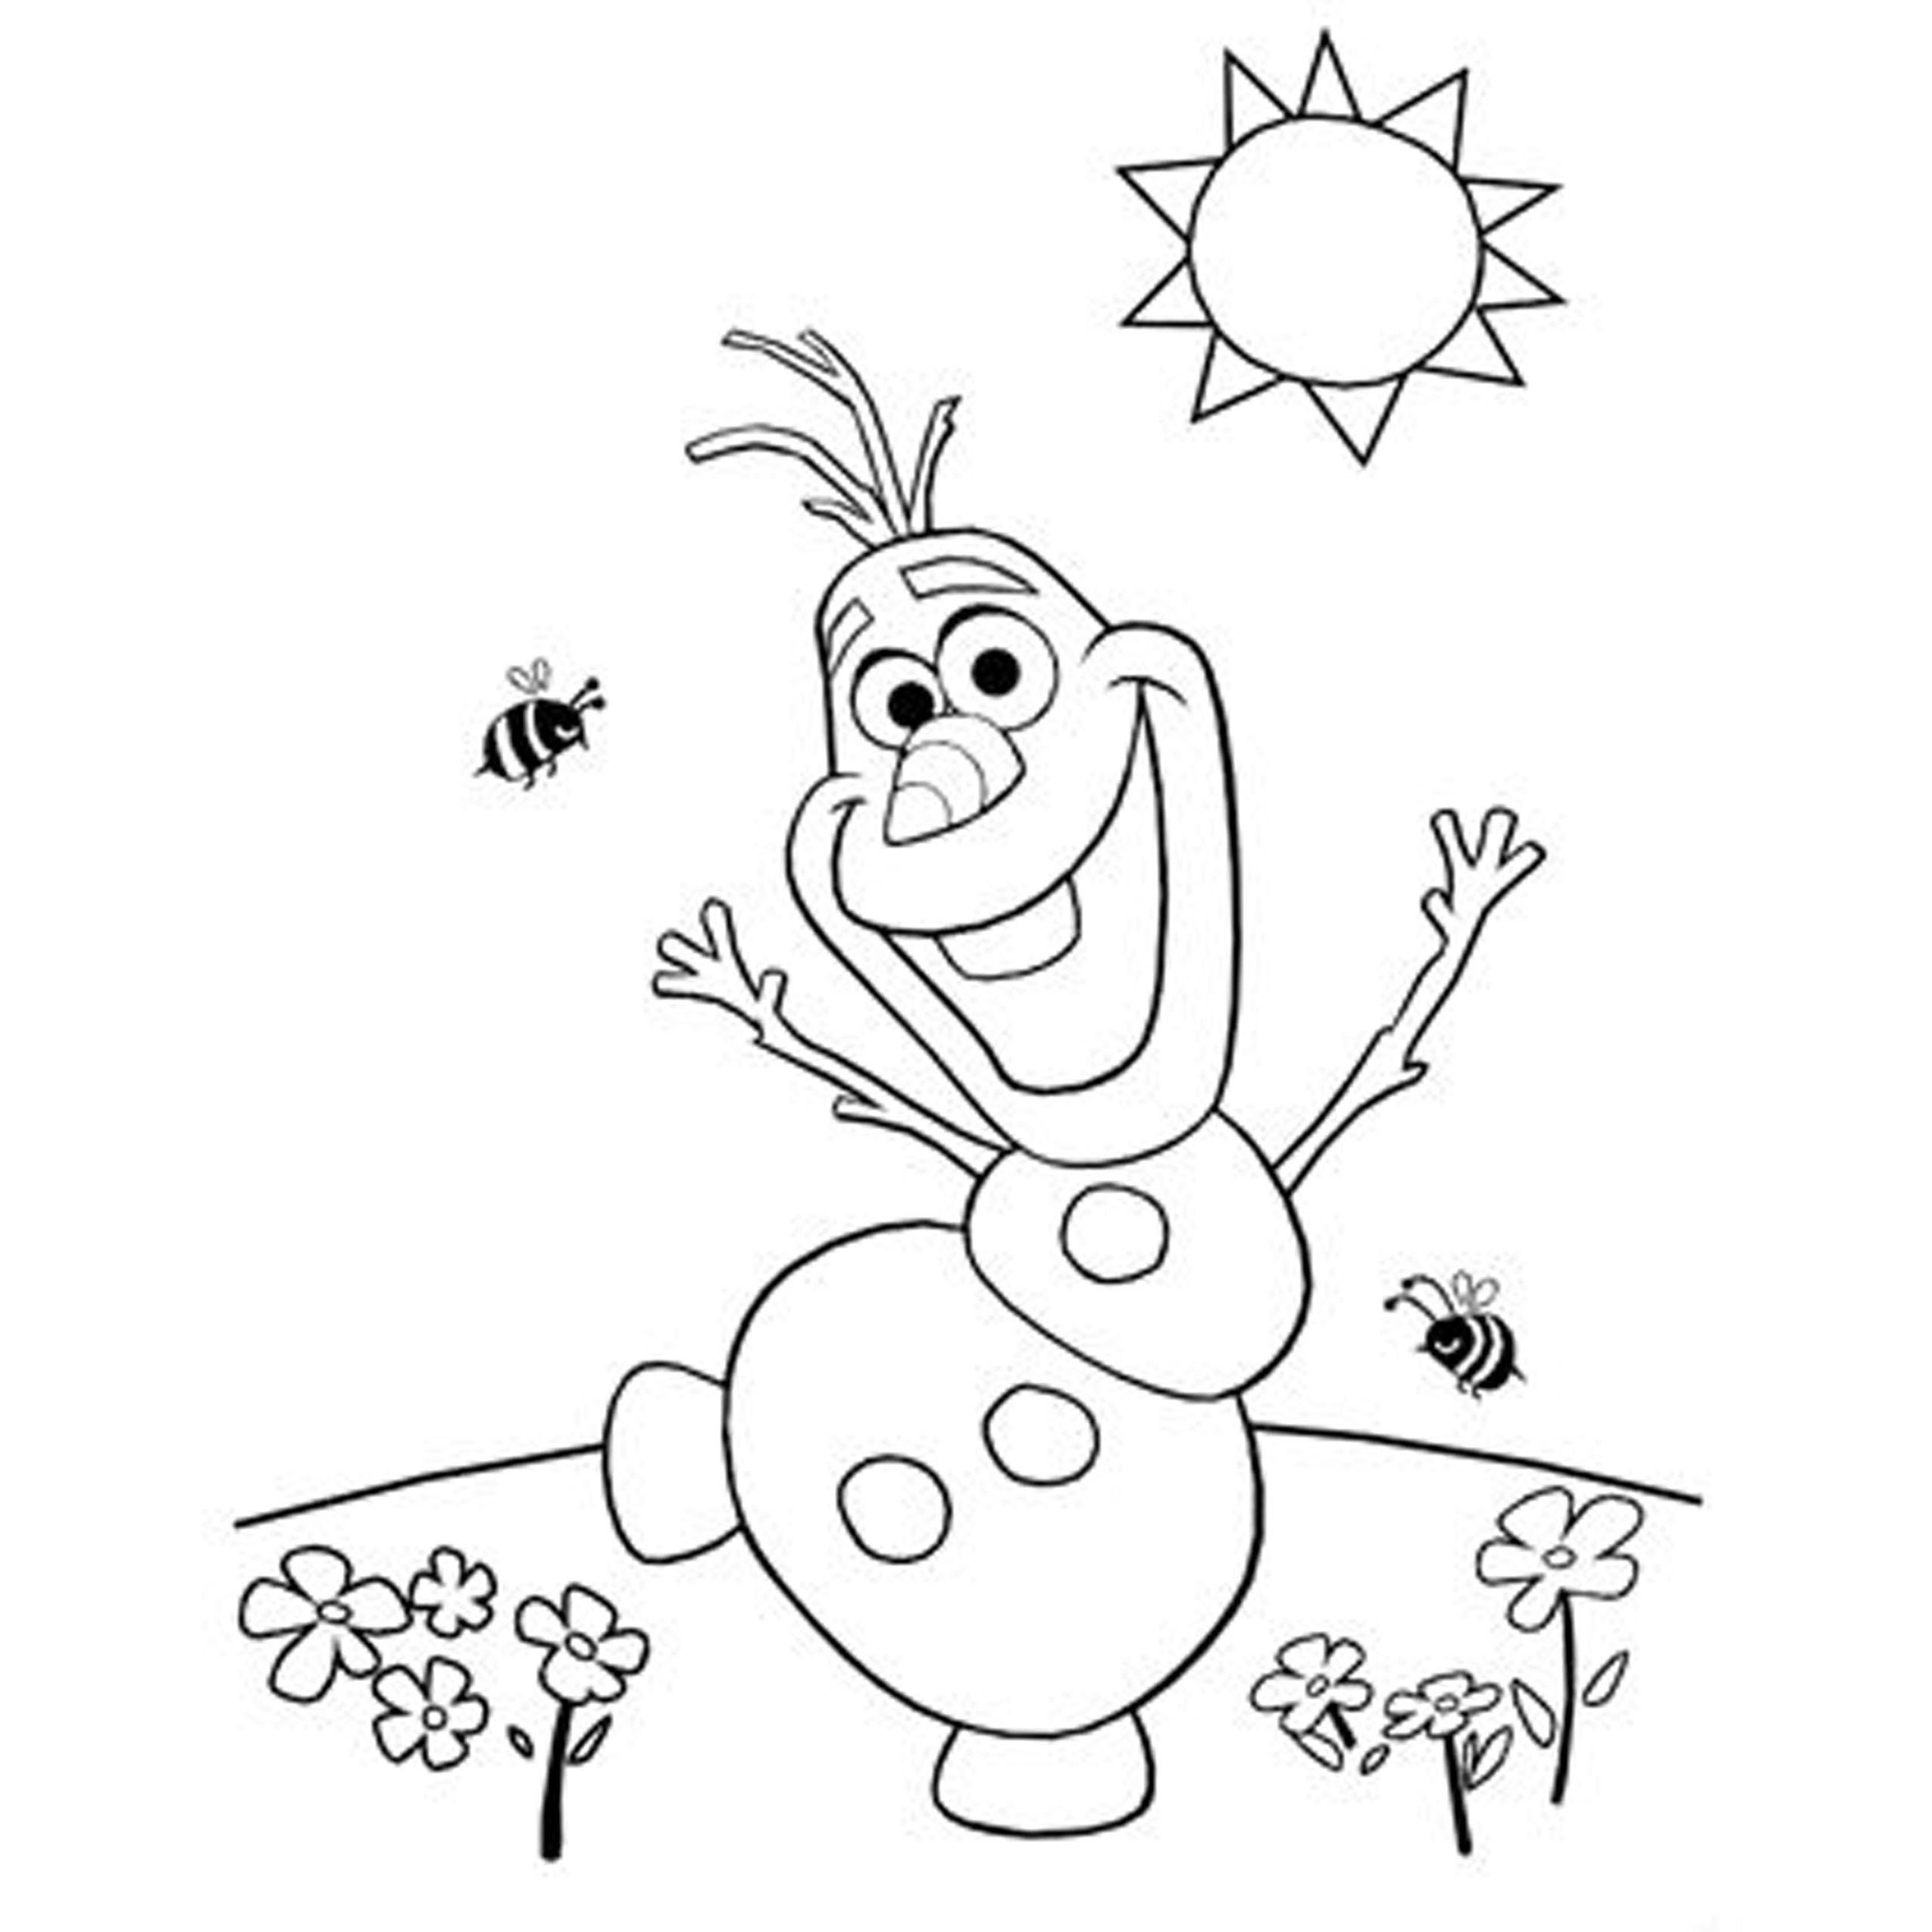 Coloring Pages For Kids Frozen
 Frozen Drawing For Kids at GetDrawings